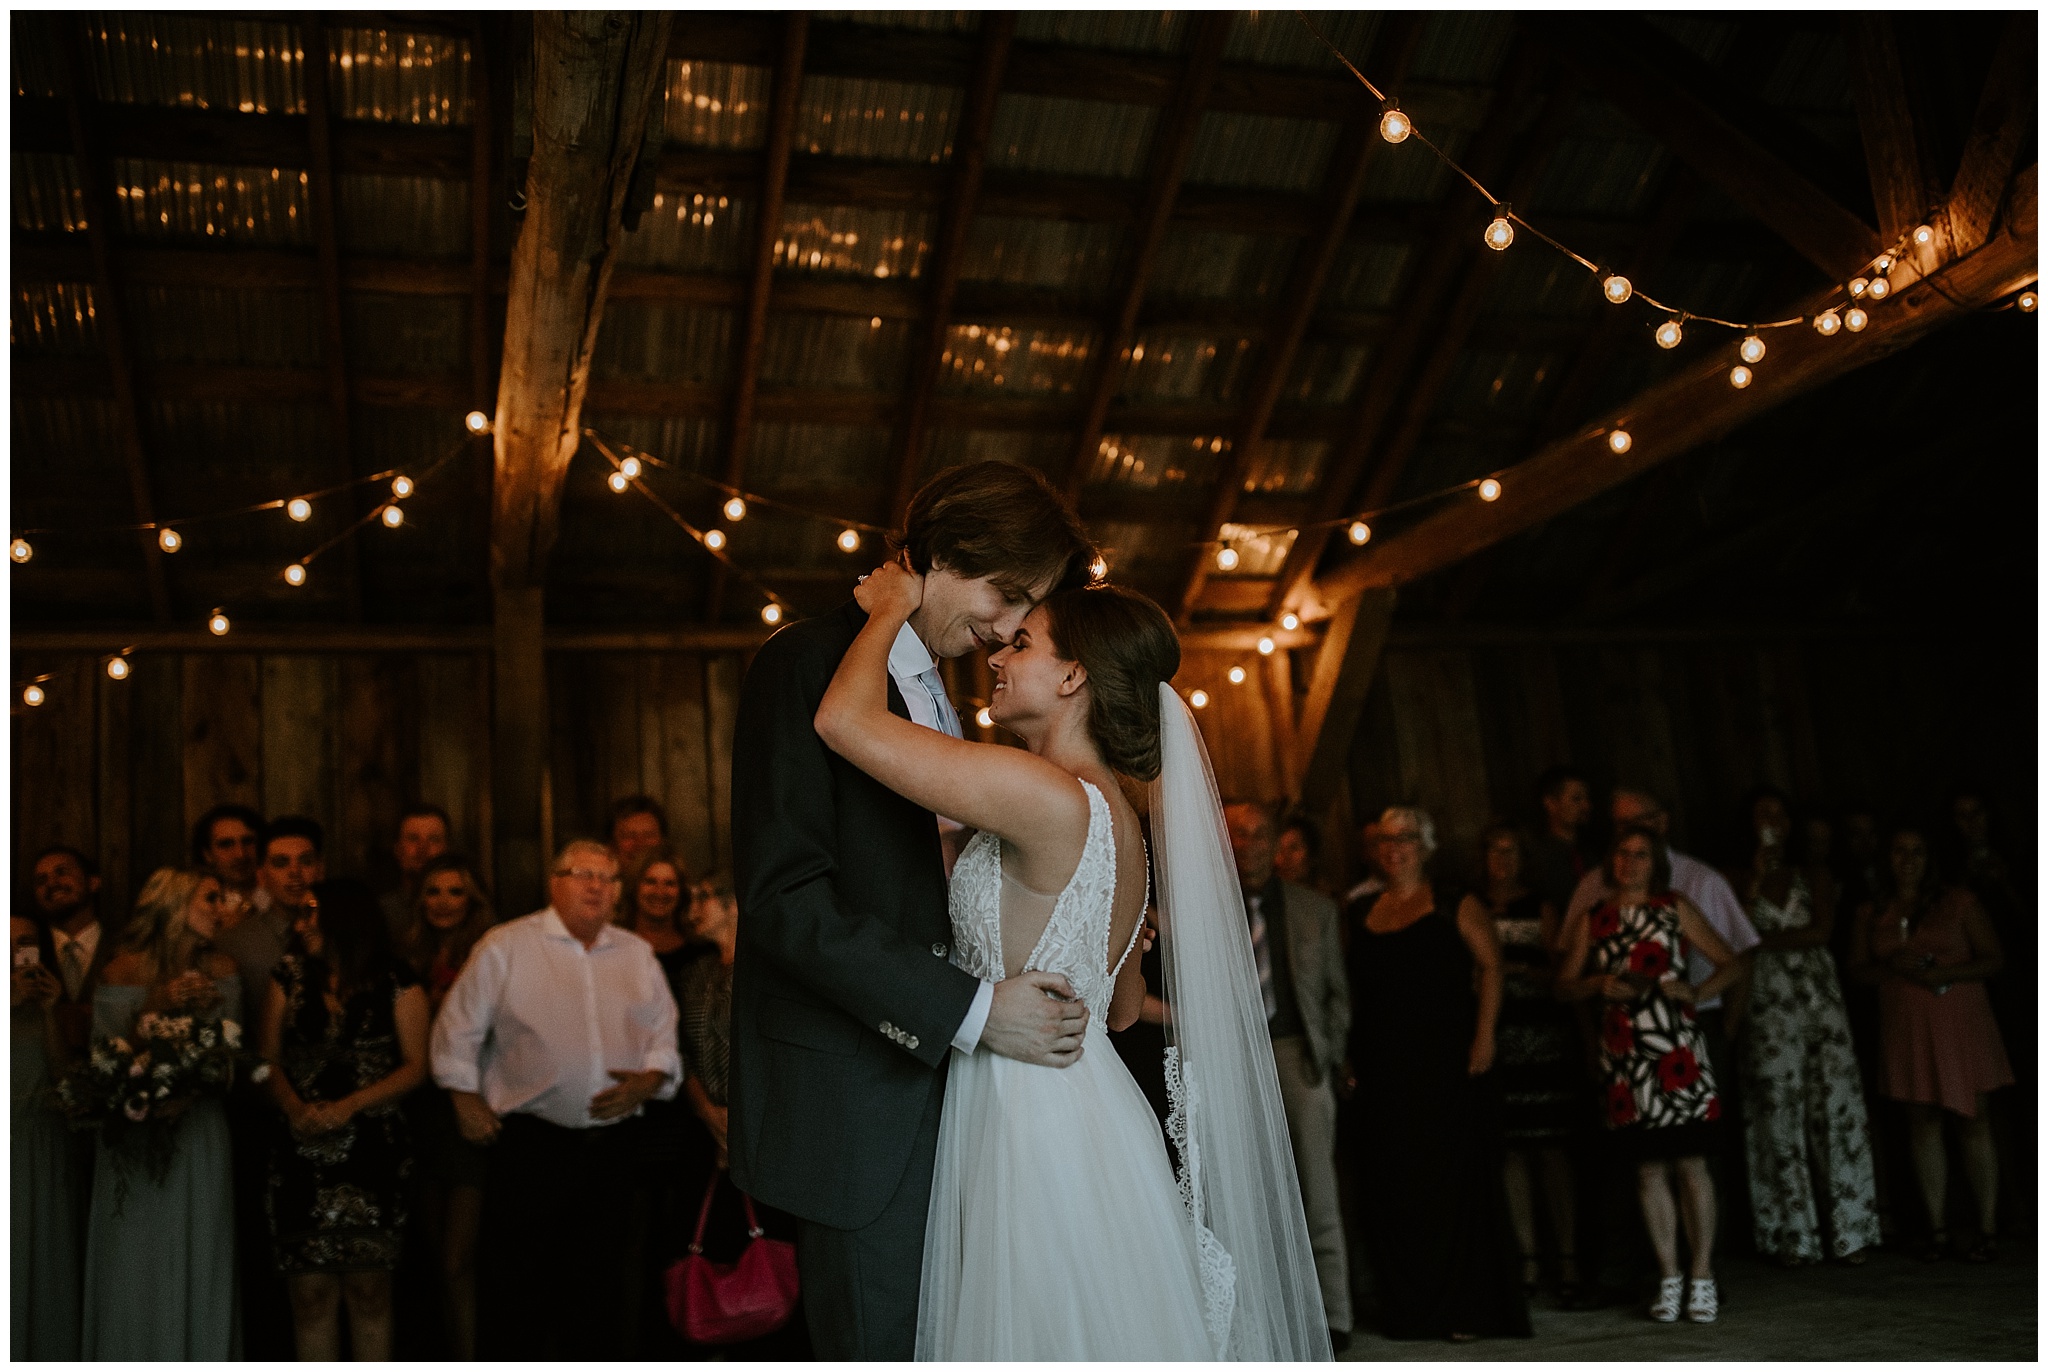 A photo of the first dance in the open barn at Estate 248 in Langley